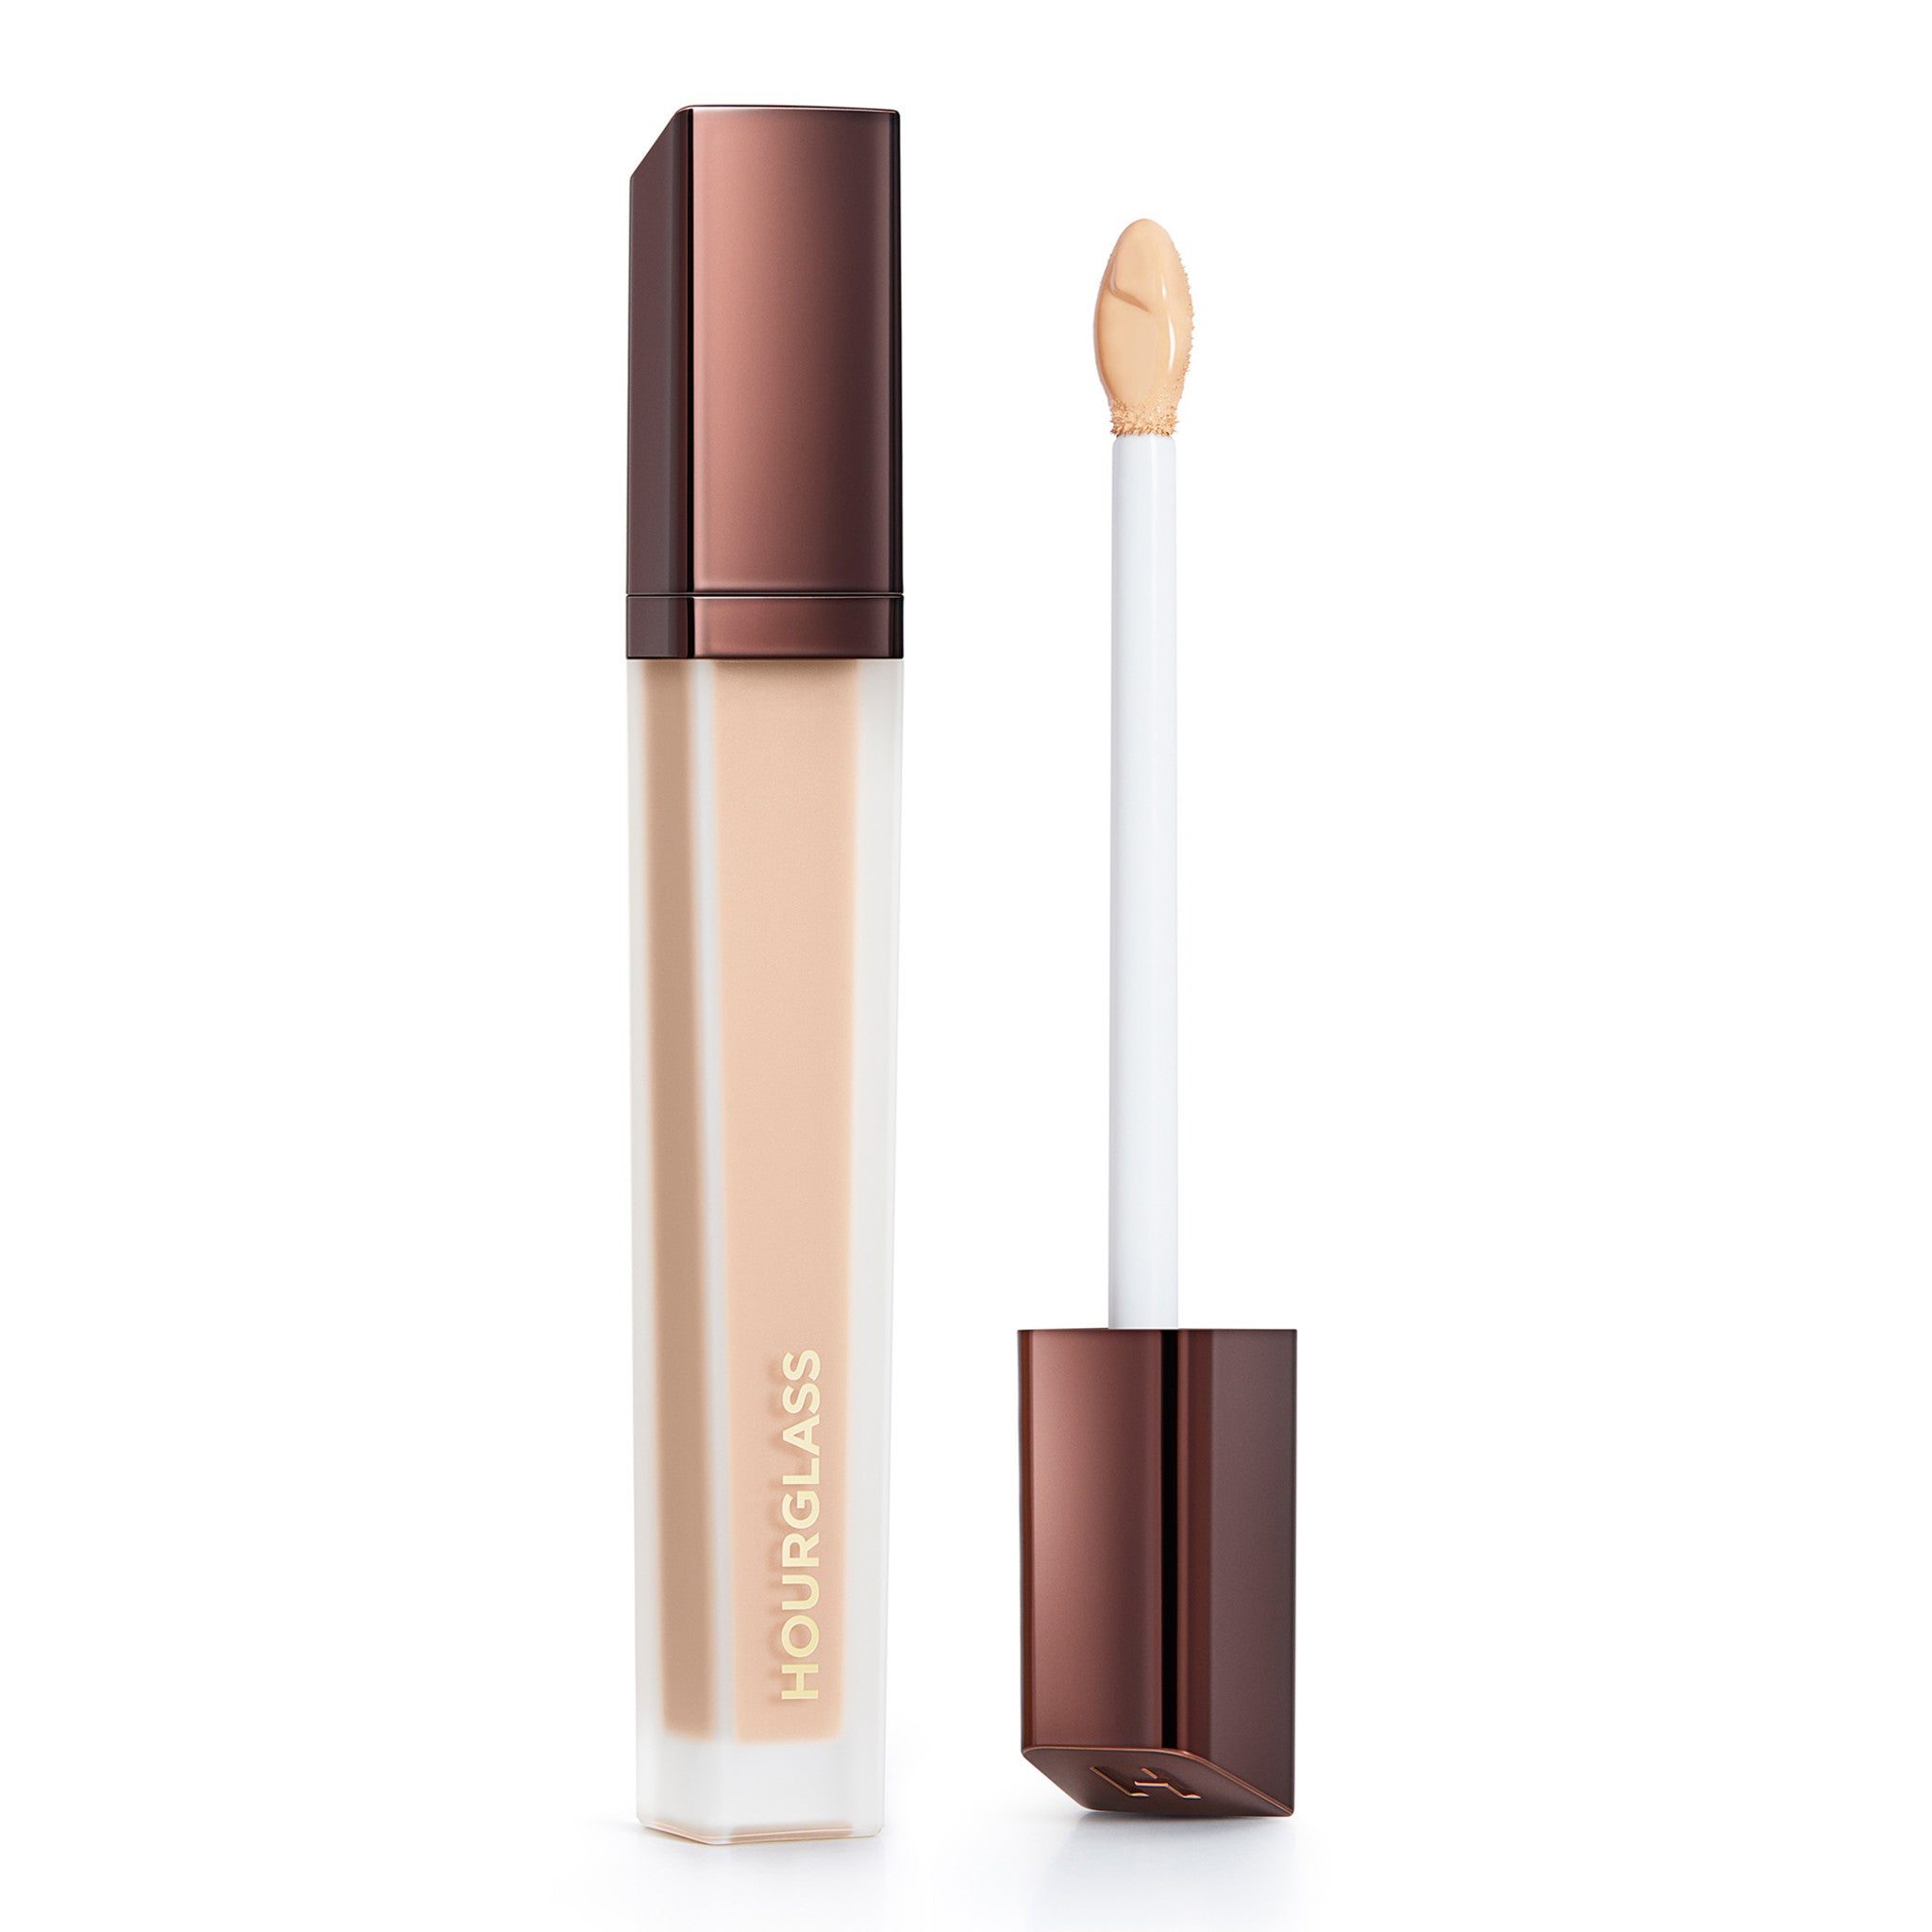 Hourglass Vanish Airbrush Concealer Color/Shade variant: Crème 1.5 main image. This product is for light cool complexions